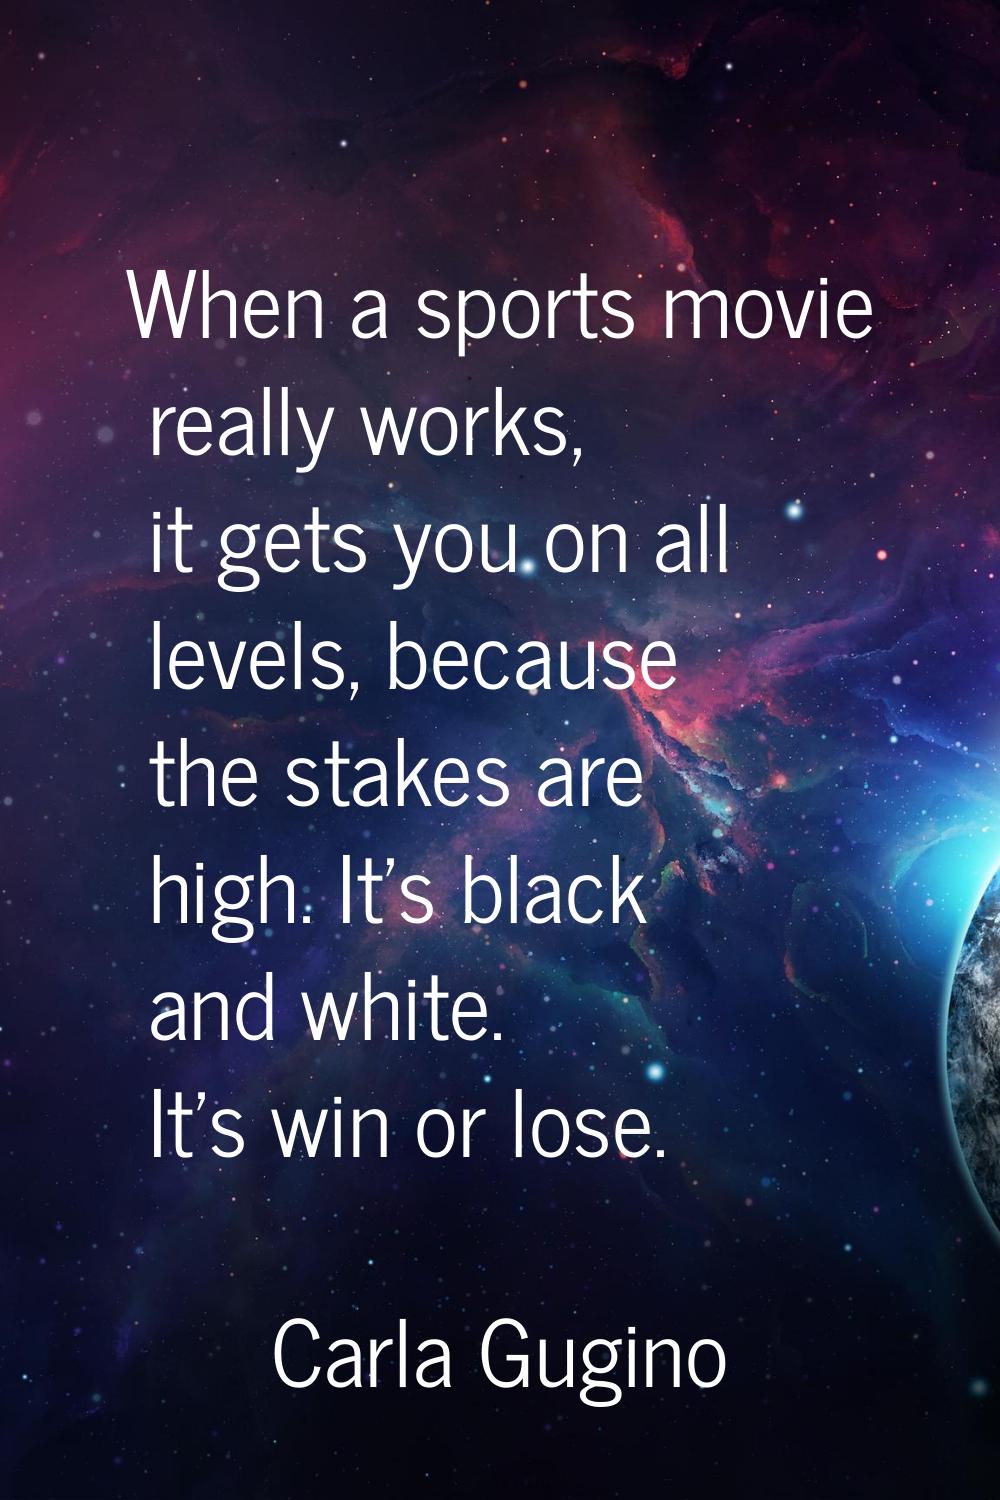 When a sports movie really works, it gets you on all levels, because the stakes are high. It's blac